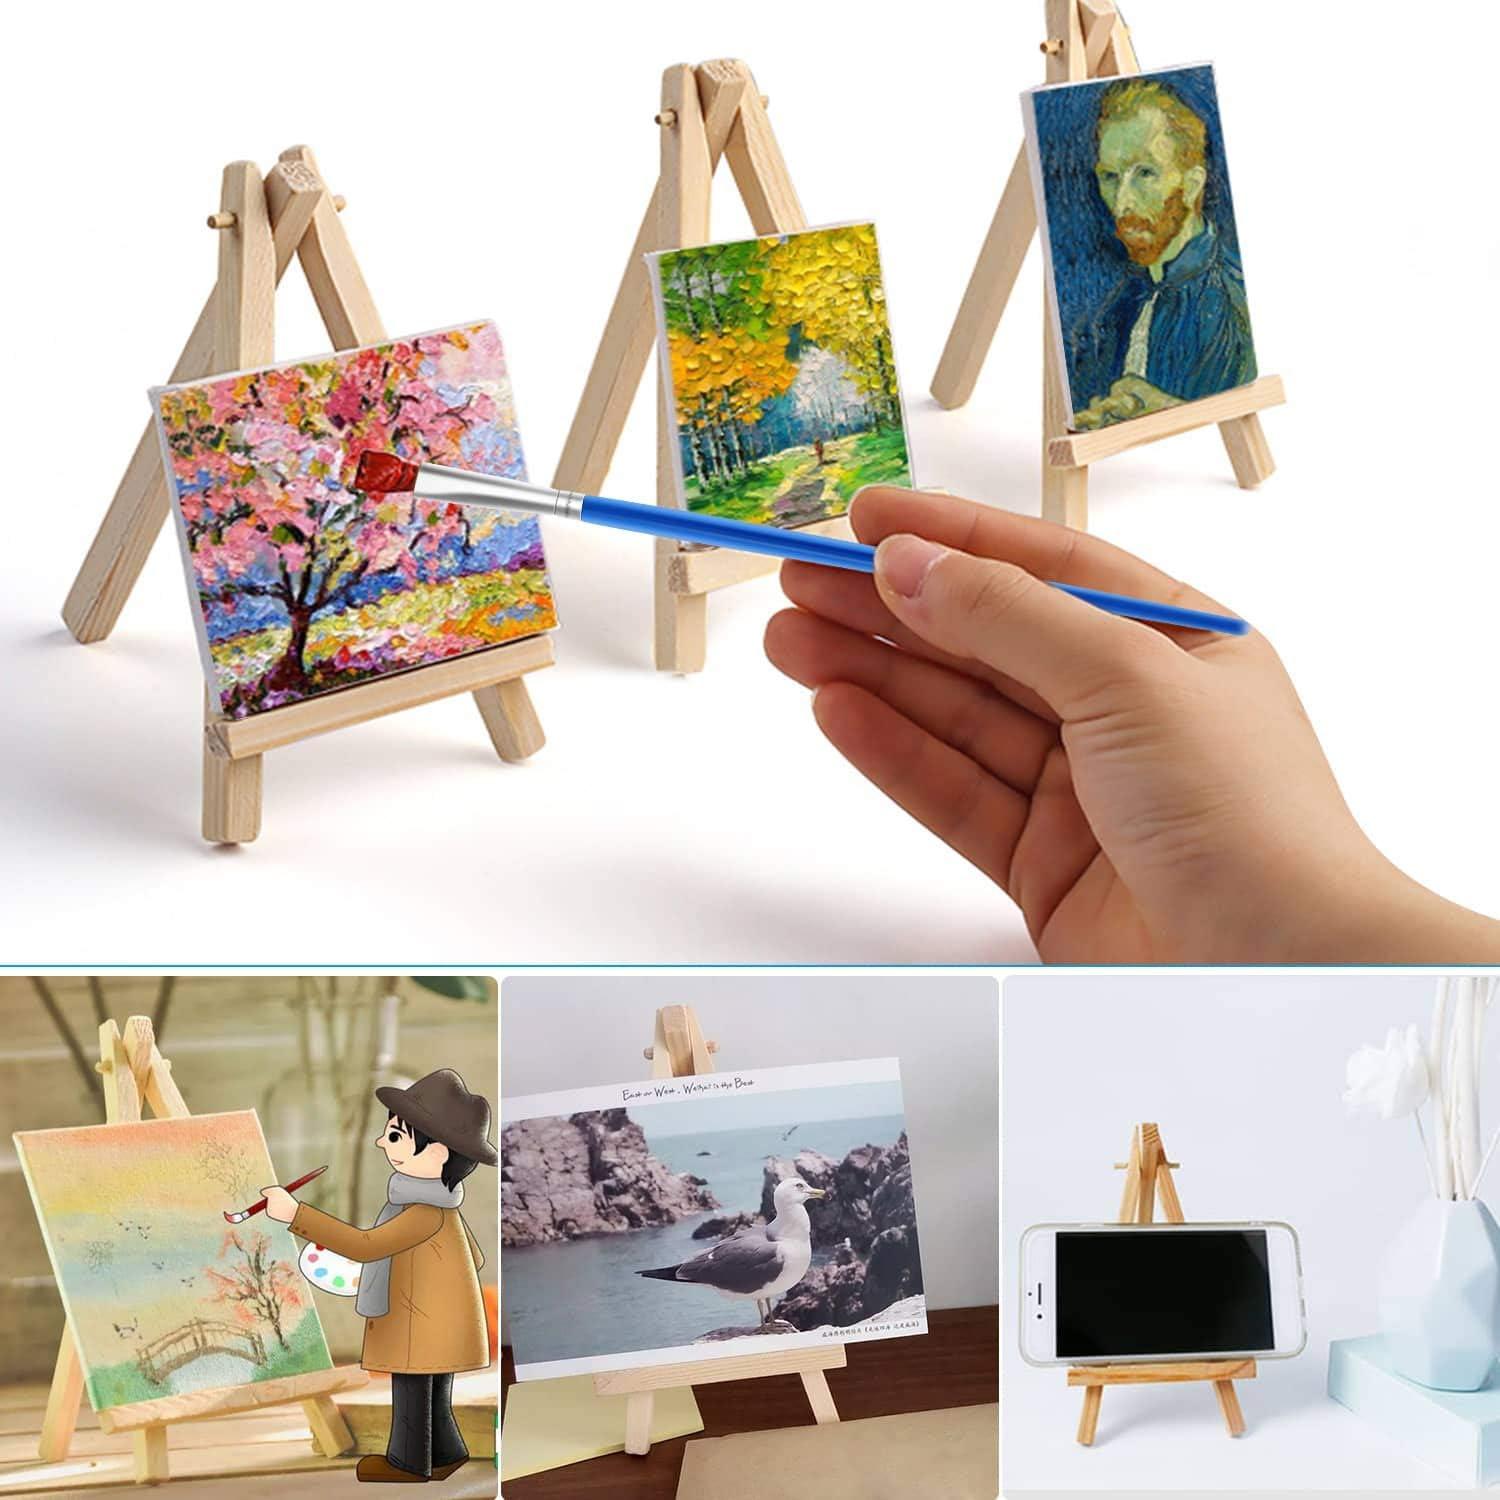 Mini Canvas and Easel Set with Mini Watercolor Paint in Bulk Set of 12 -  Kids Art Party Favors & Party Supplies - 4x4 Small Canvases for Painting